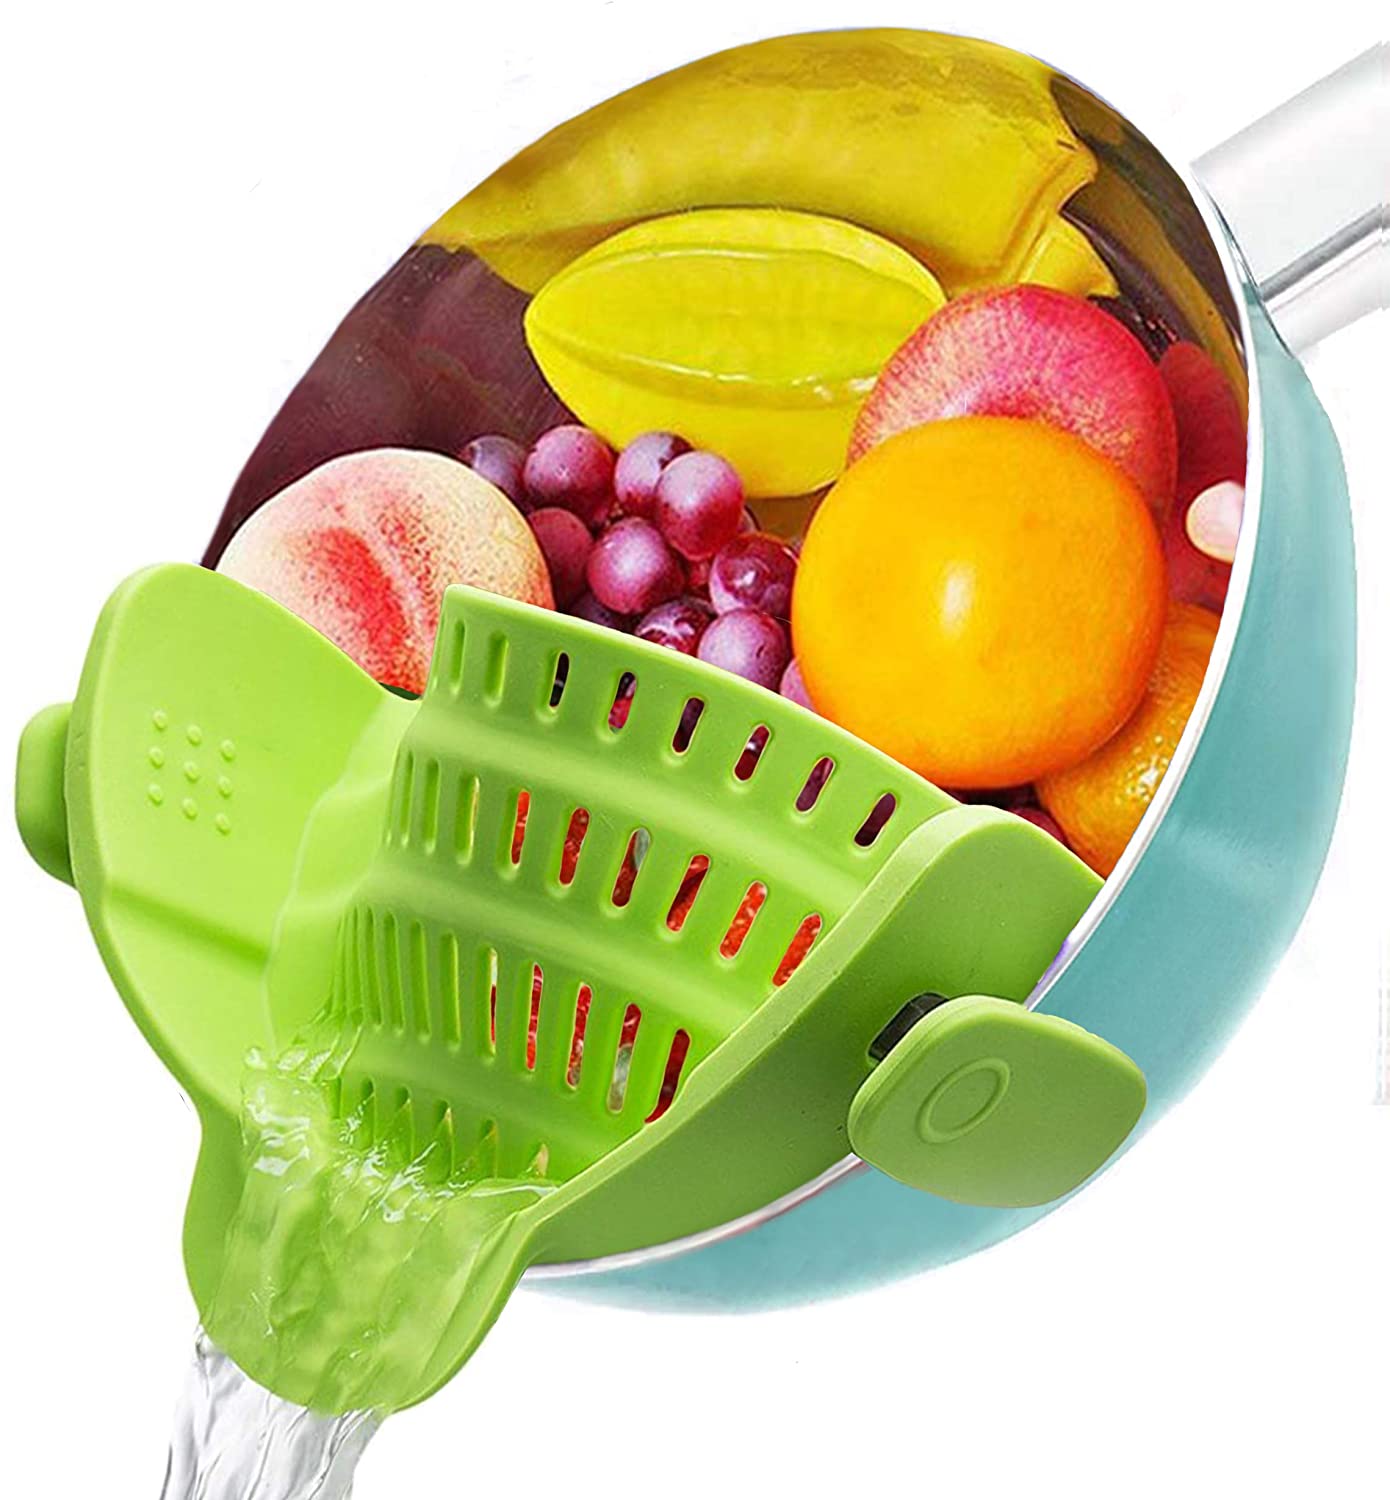 VICVEO Silicone Clip on Strainer, Patented Clip on Silicone Colander, Clip-on Kitchen Food Strainer for Pasta,Fits Almost Pots (Green) - image 1 of 8